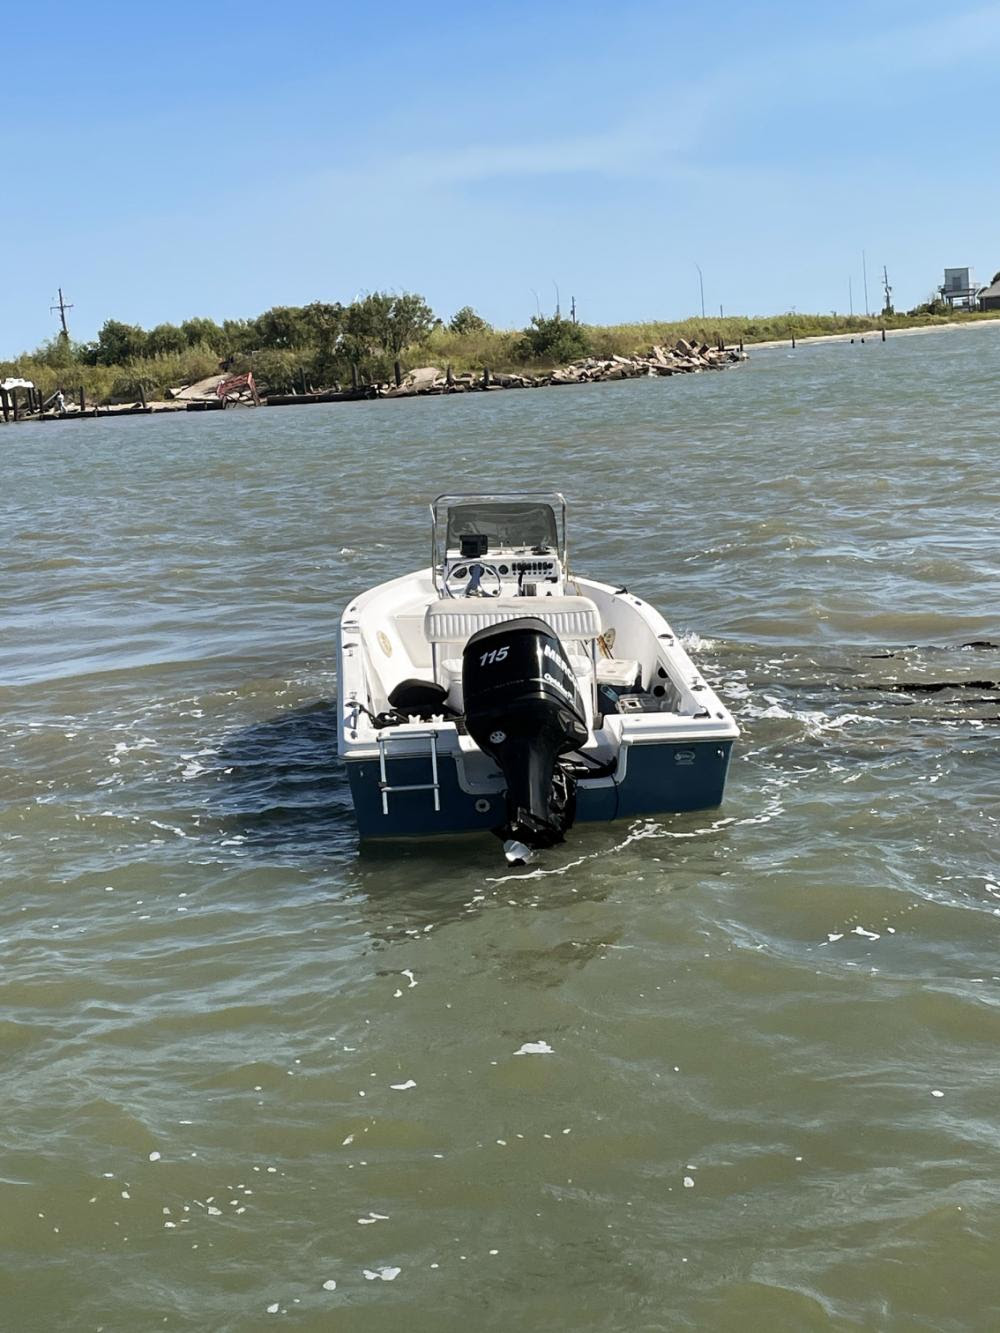 A 17-foot pleasure craft rests aground on rocks north of the Bolivar Ferry Landing near Galveston, Texas, Oct. 20, 2022. A Coast Guard Station Galveston 29-foot Response Boat–Small crew safely removed two boaters from the vessel, which was taking on water. (U.S. Coast Guard photo by Petty Officer 3rd Class Chris San Nicolas)